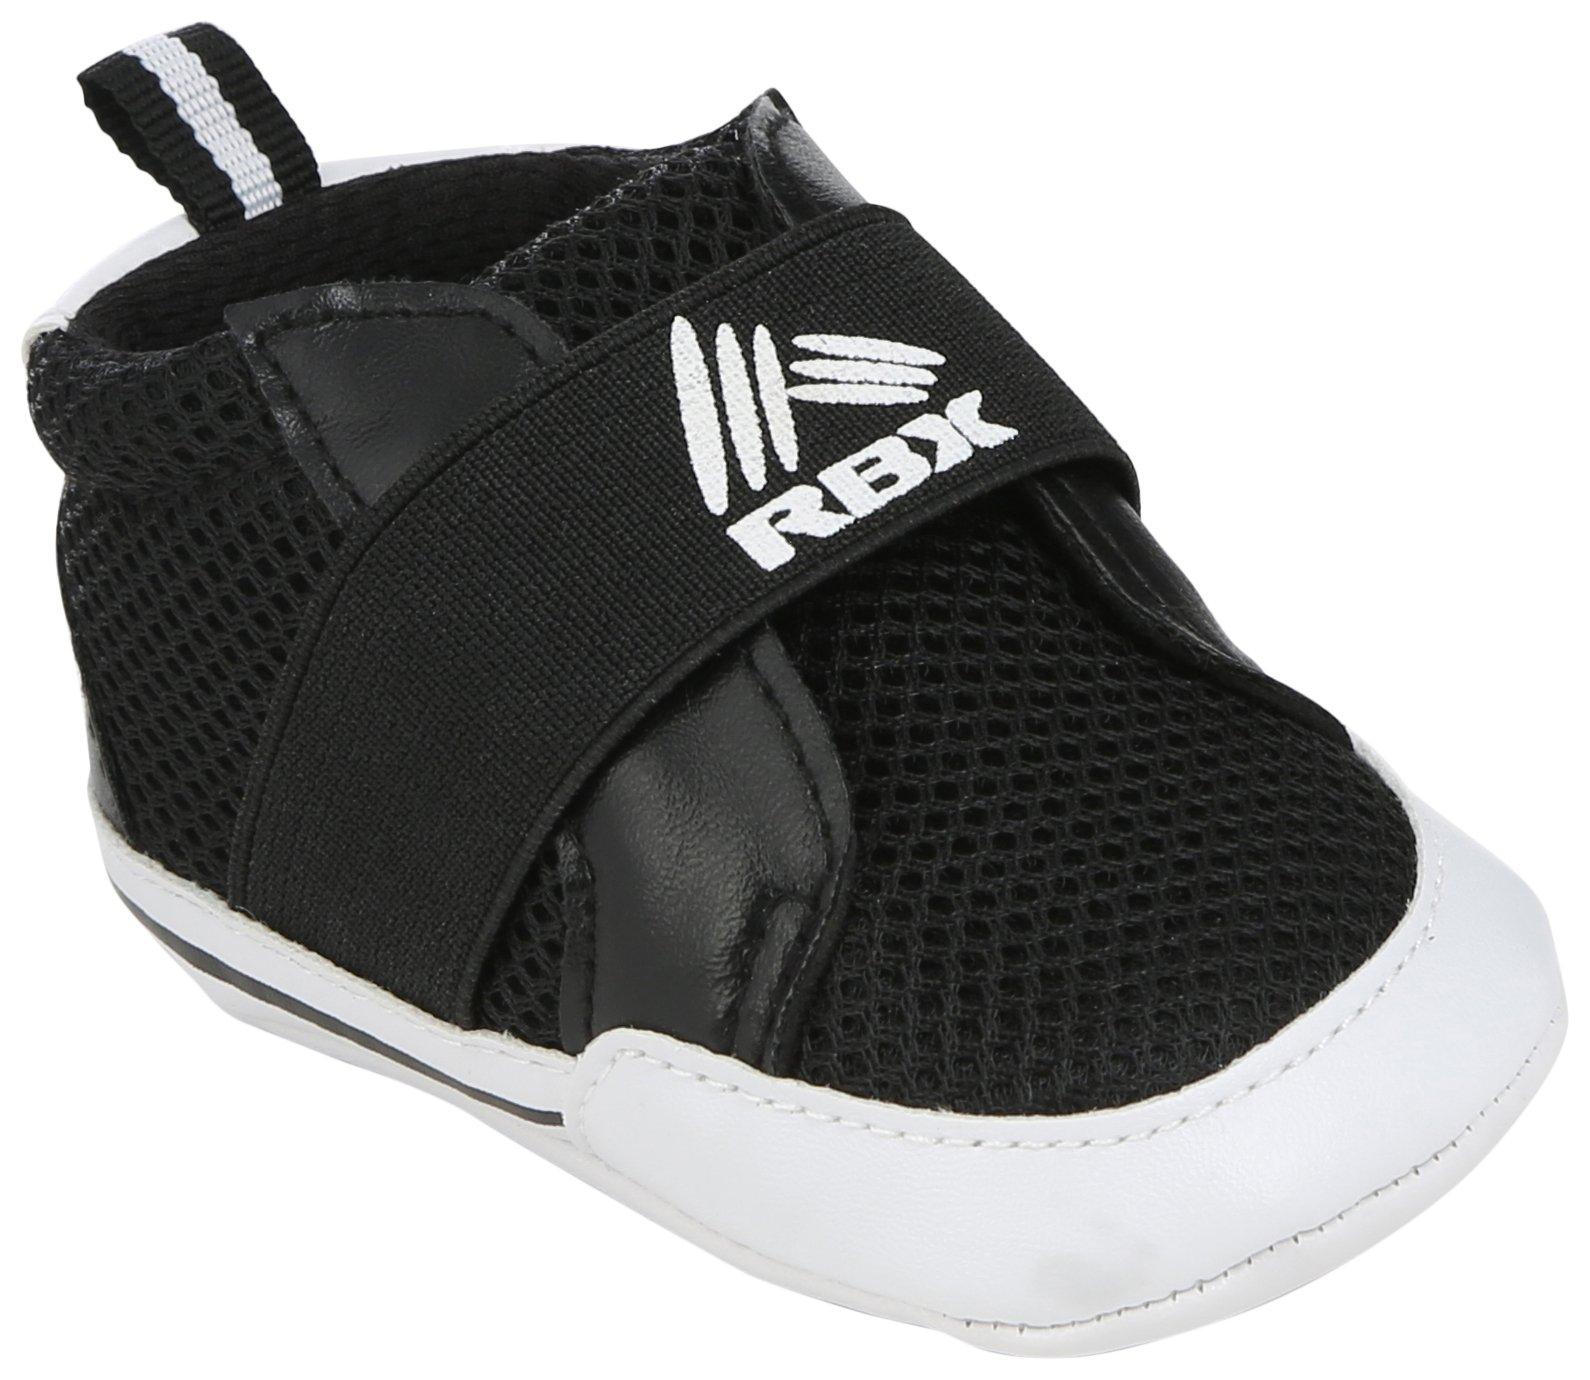 RBX Toddler Boys No Lace Sneakers